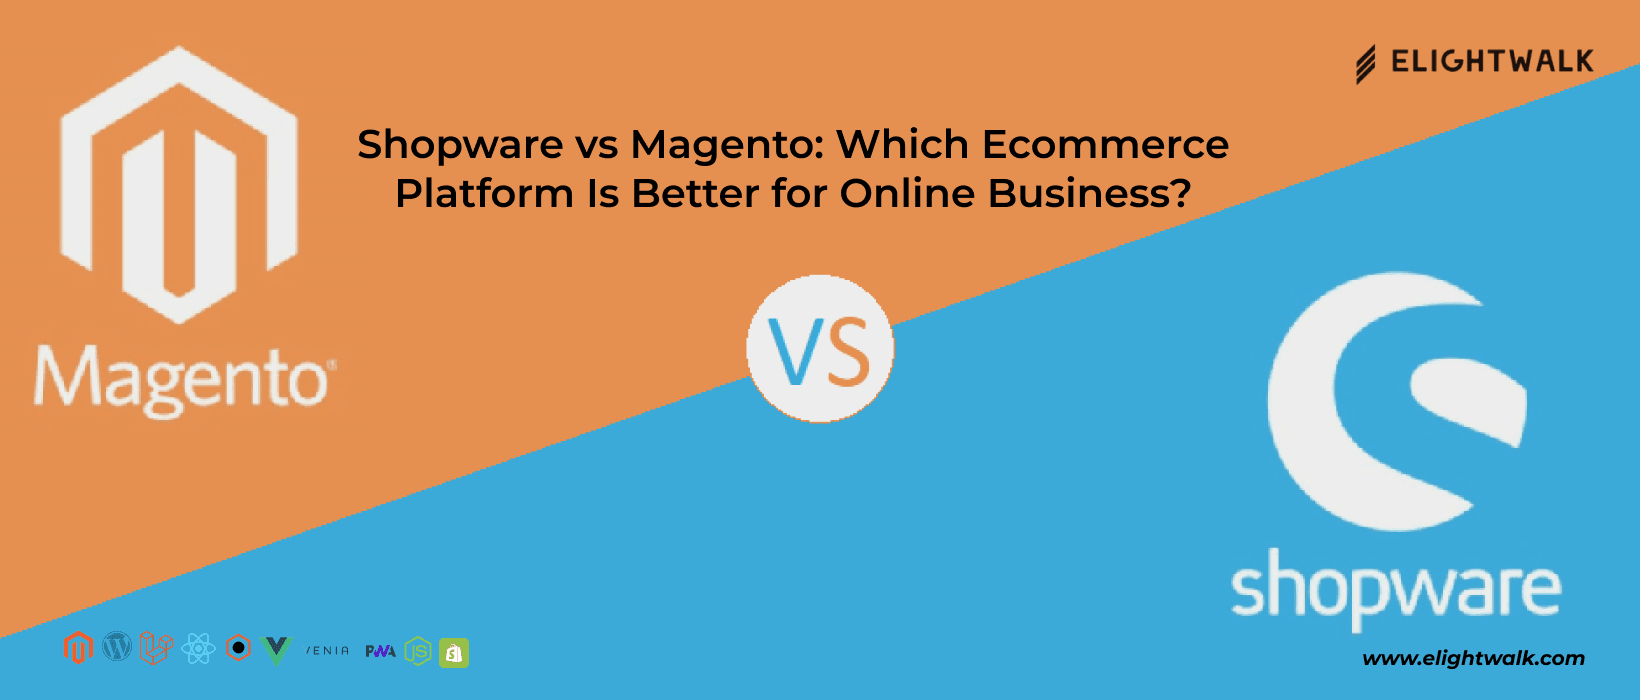 Shopware Vs Magento which is platform is better